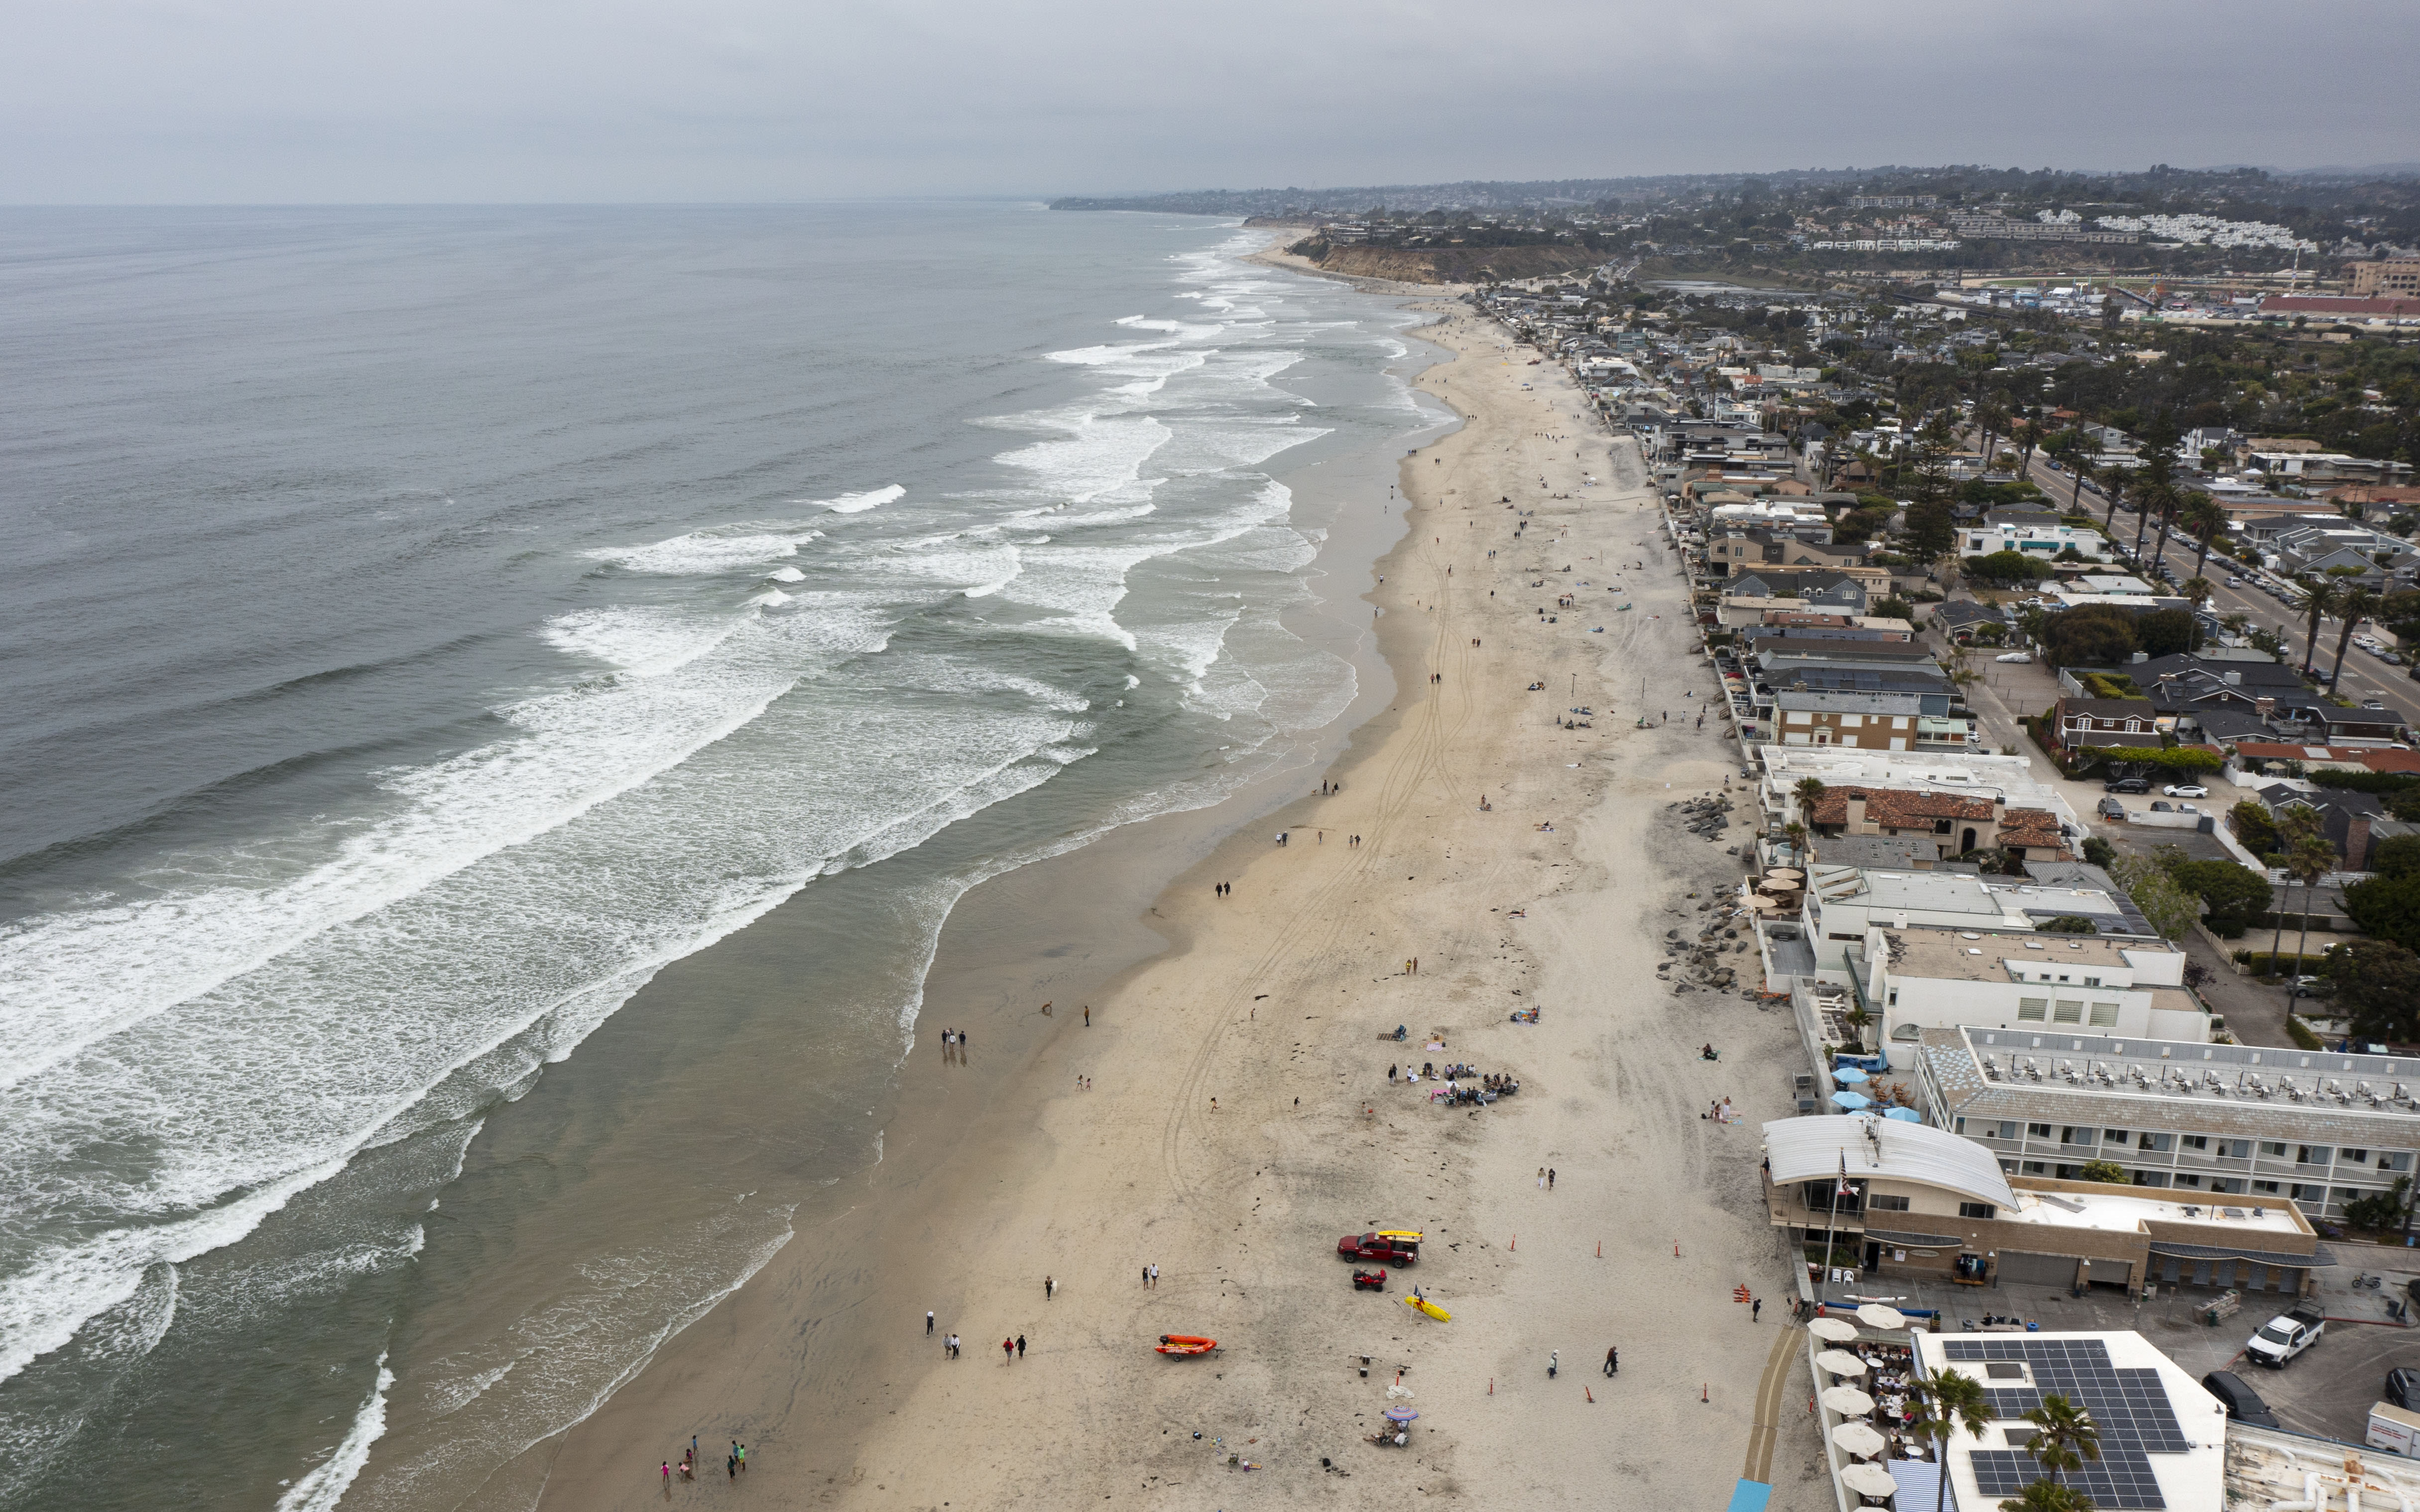 Beaches closed after swimmer suffers 'significant' injury from shark bite in Del Mar